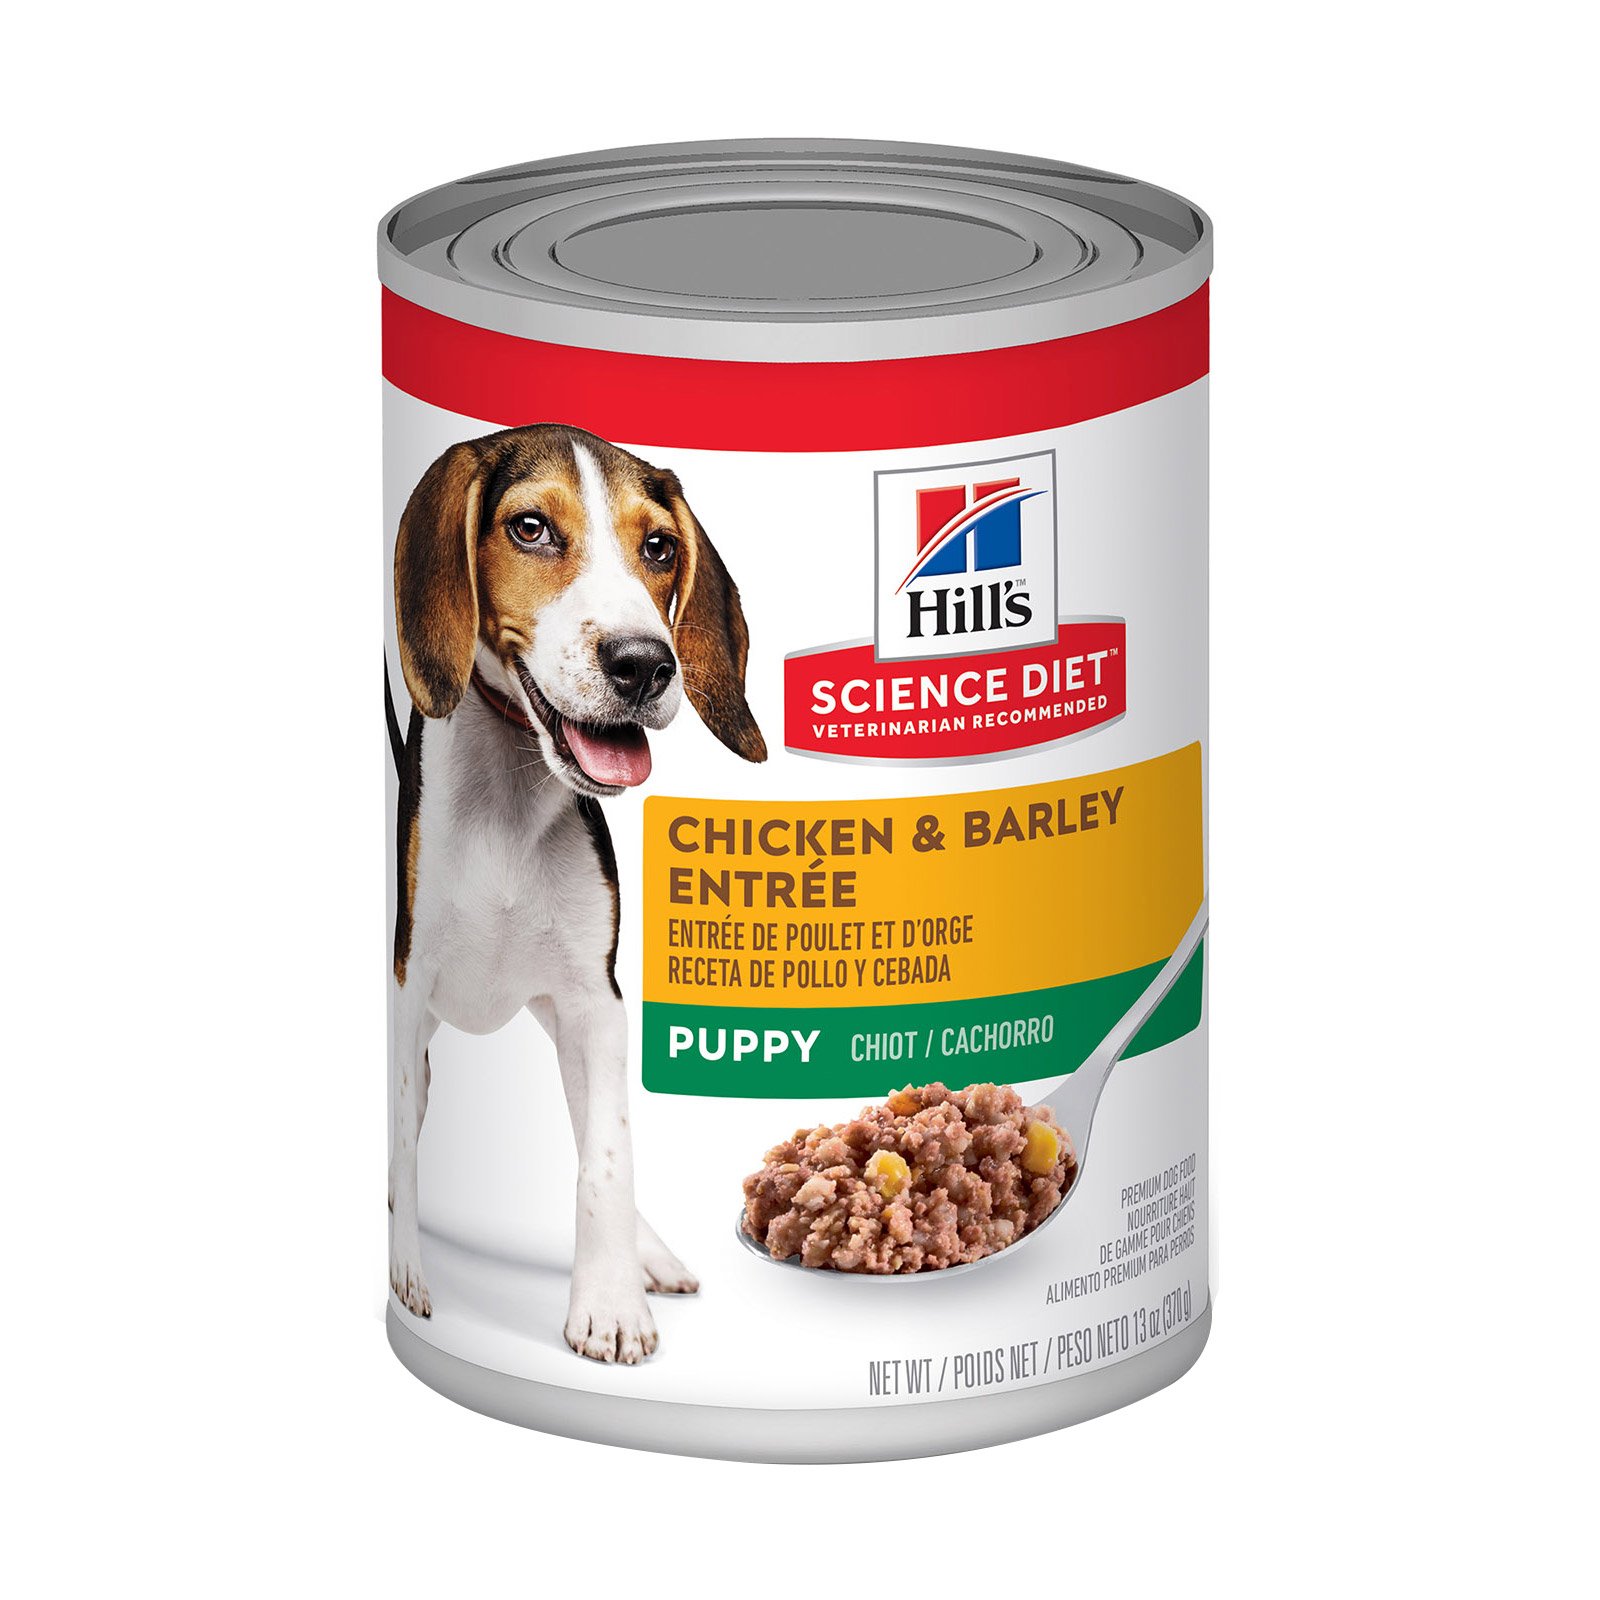 Hill's Science Diet Puppy Chicken & Barley Entrée Canned Dog Food 370 Gm